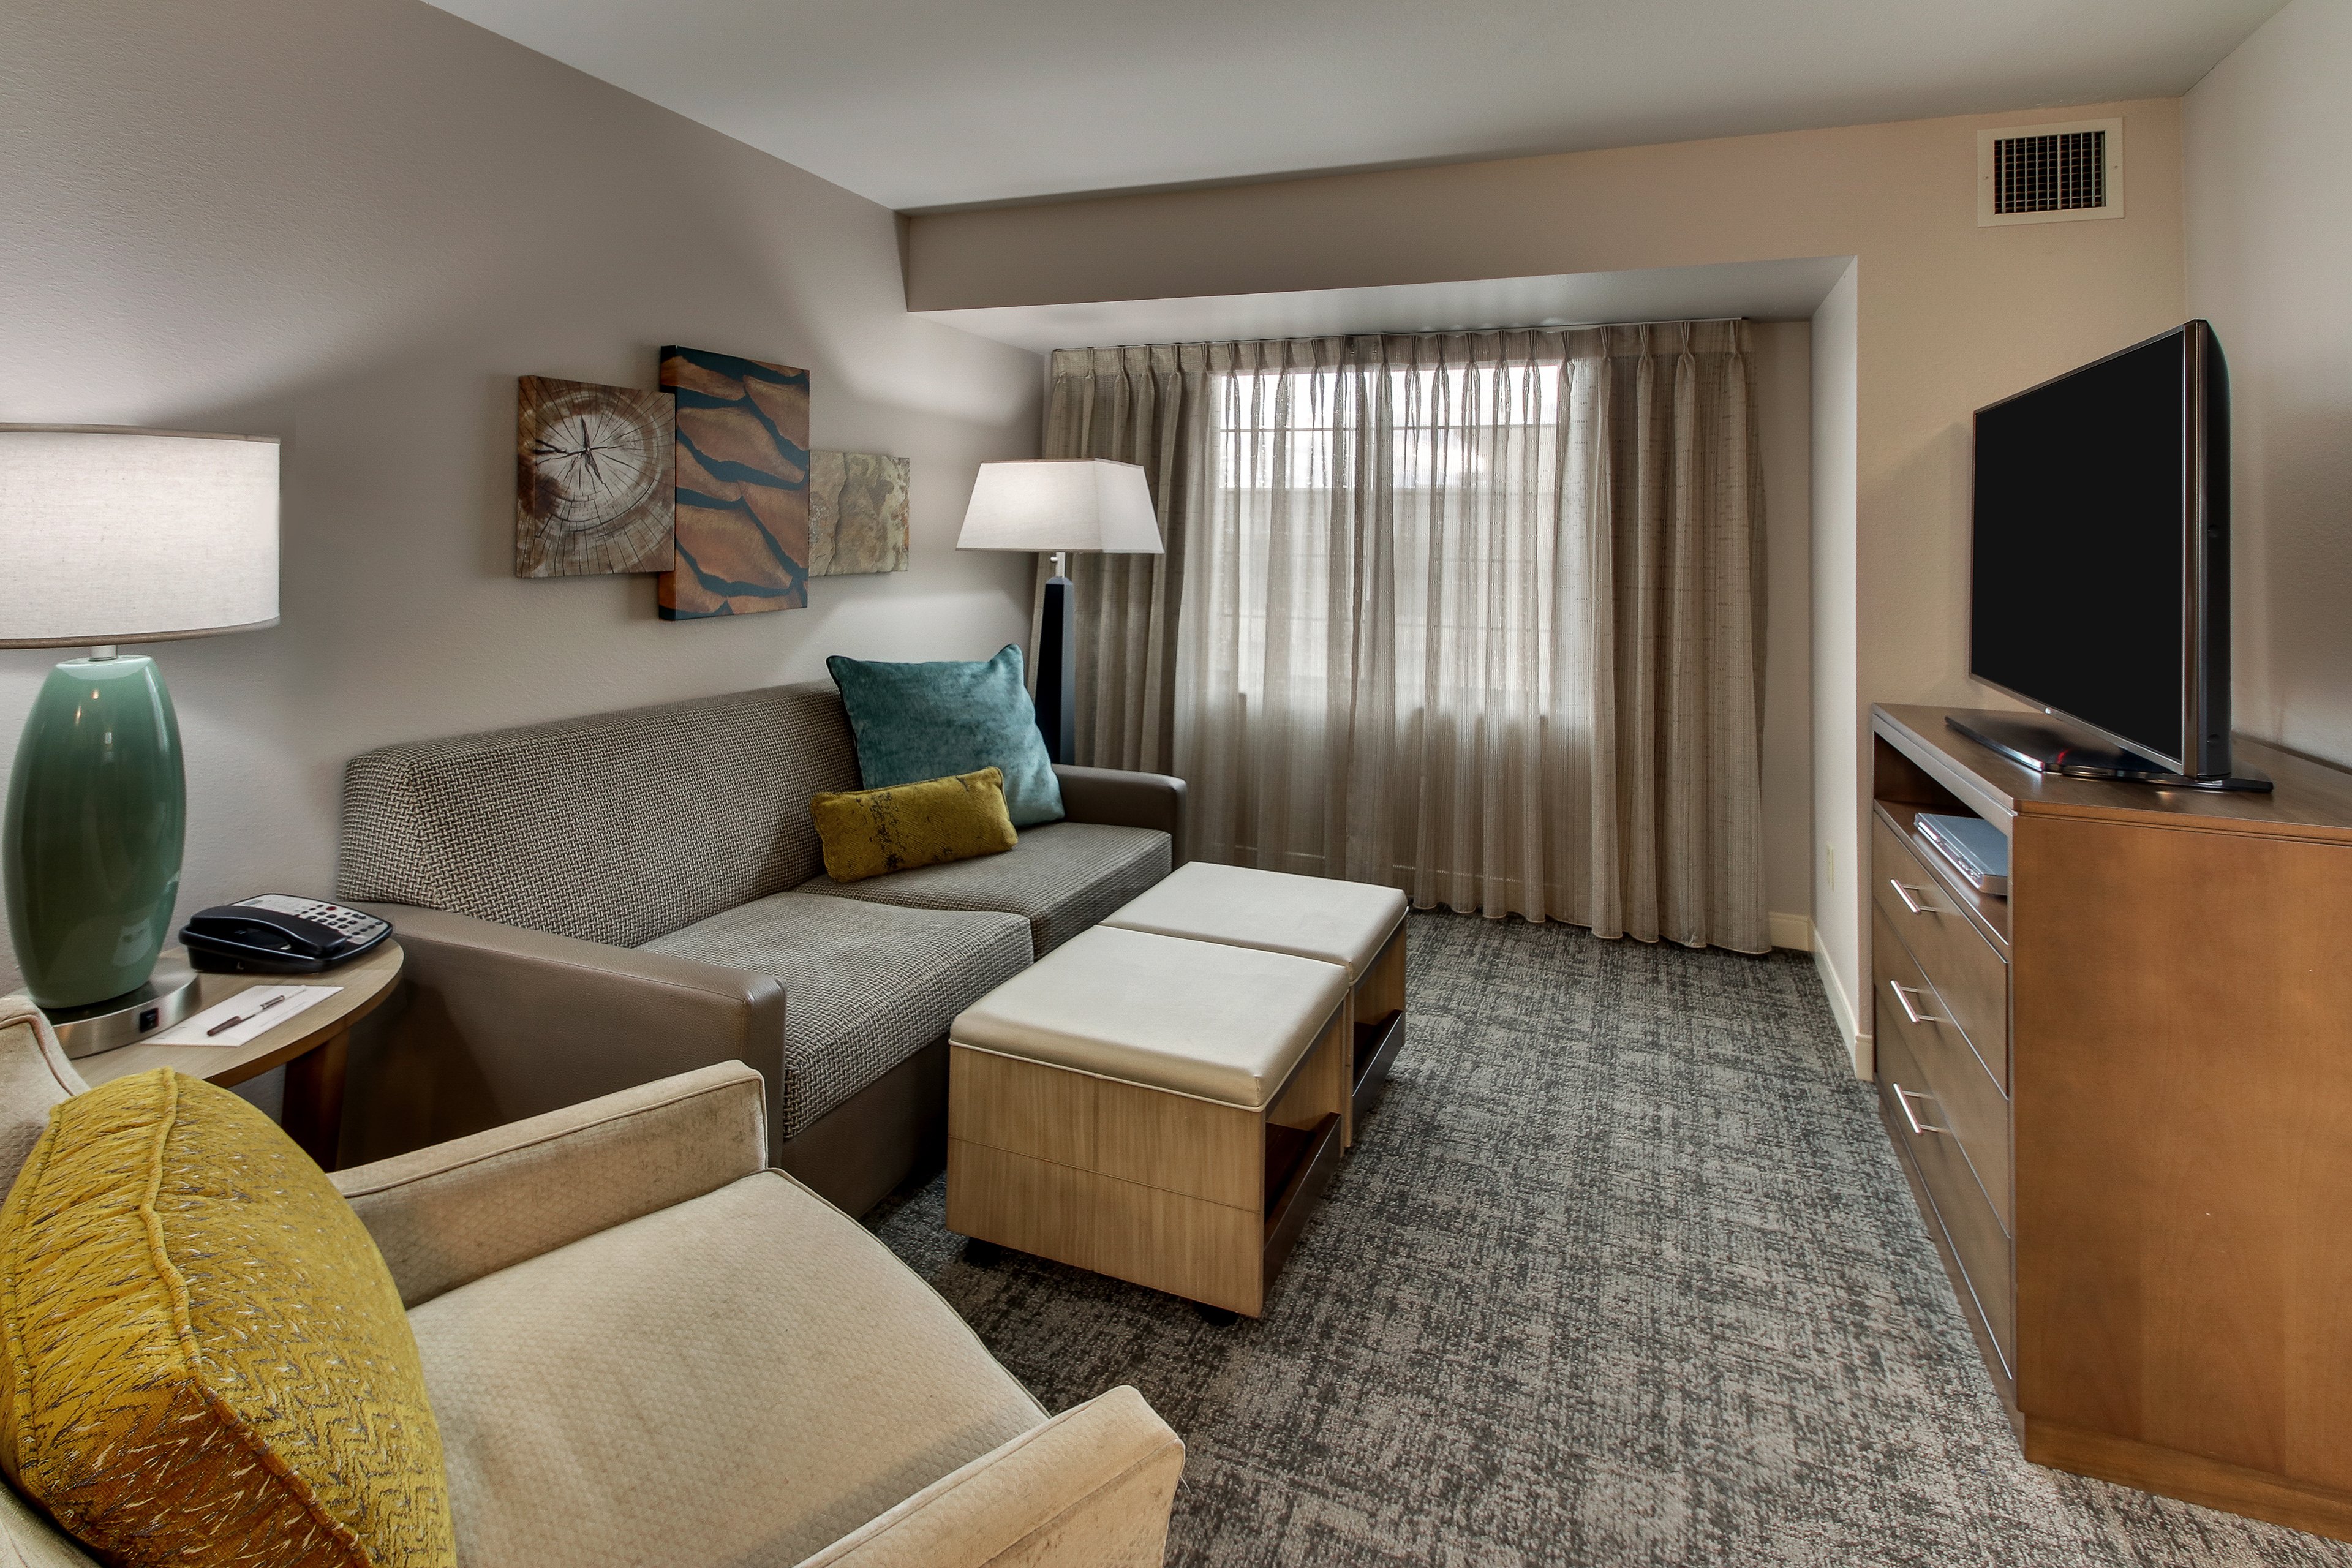 Home away from home, enjoy the comfort of a full suite